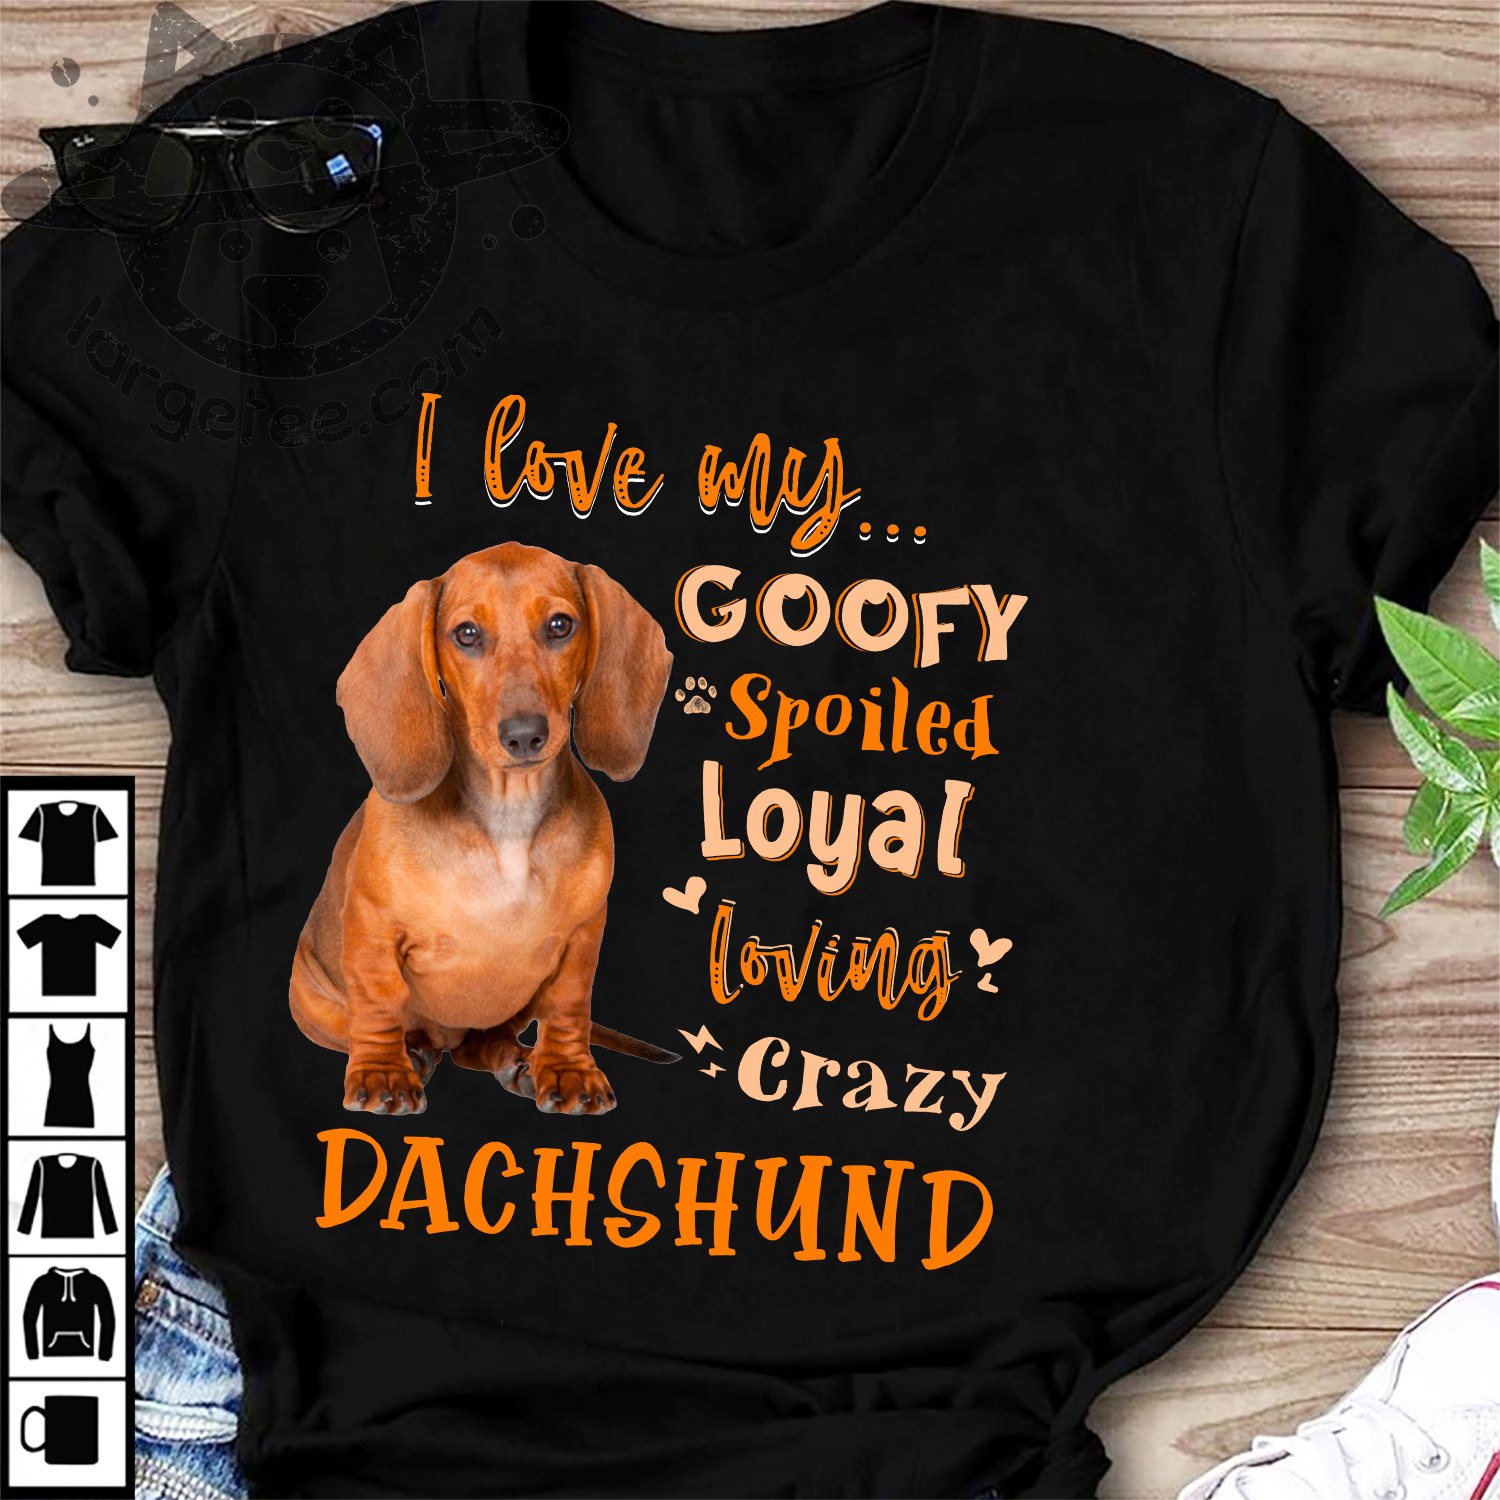 I am Loved by a Dachshund Dog Sweatshirt Also Dog T Shirt Available ------